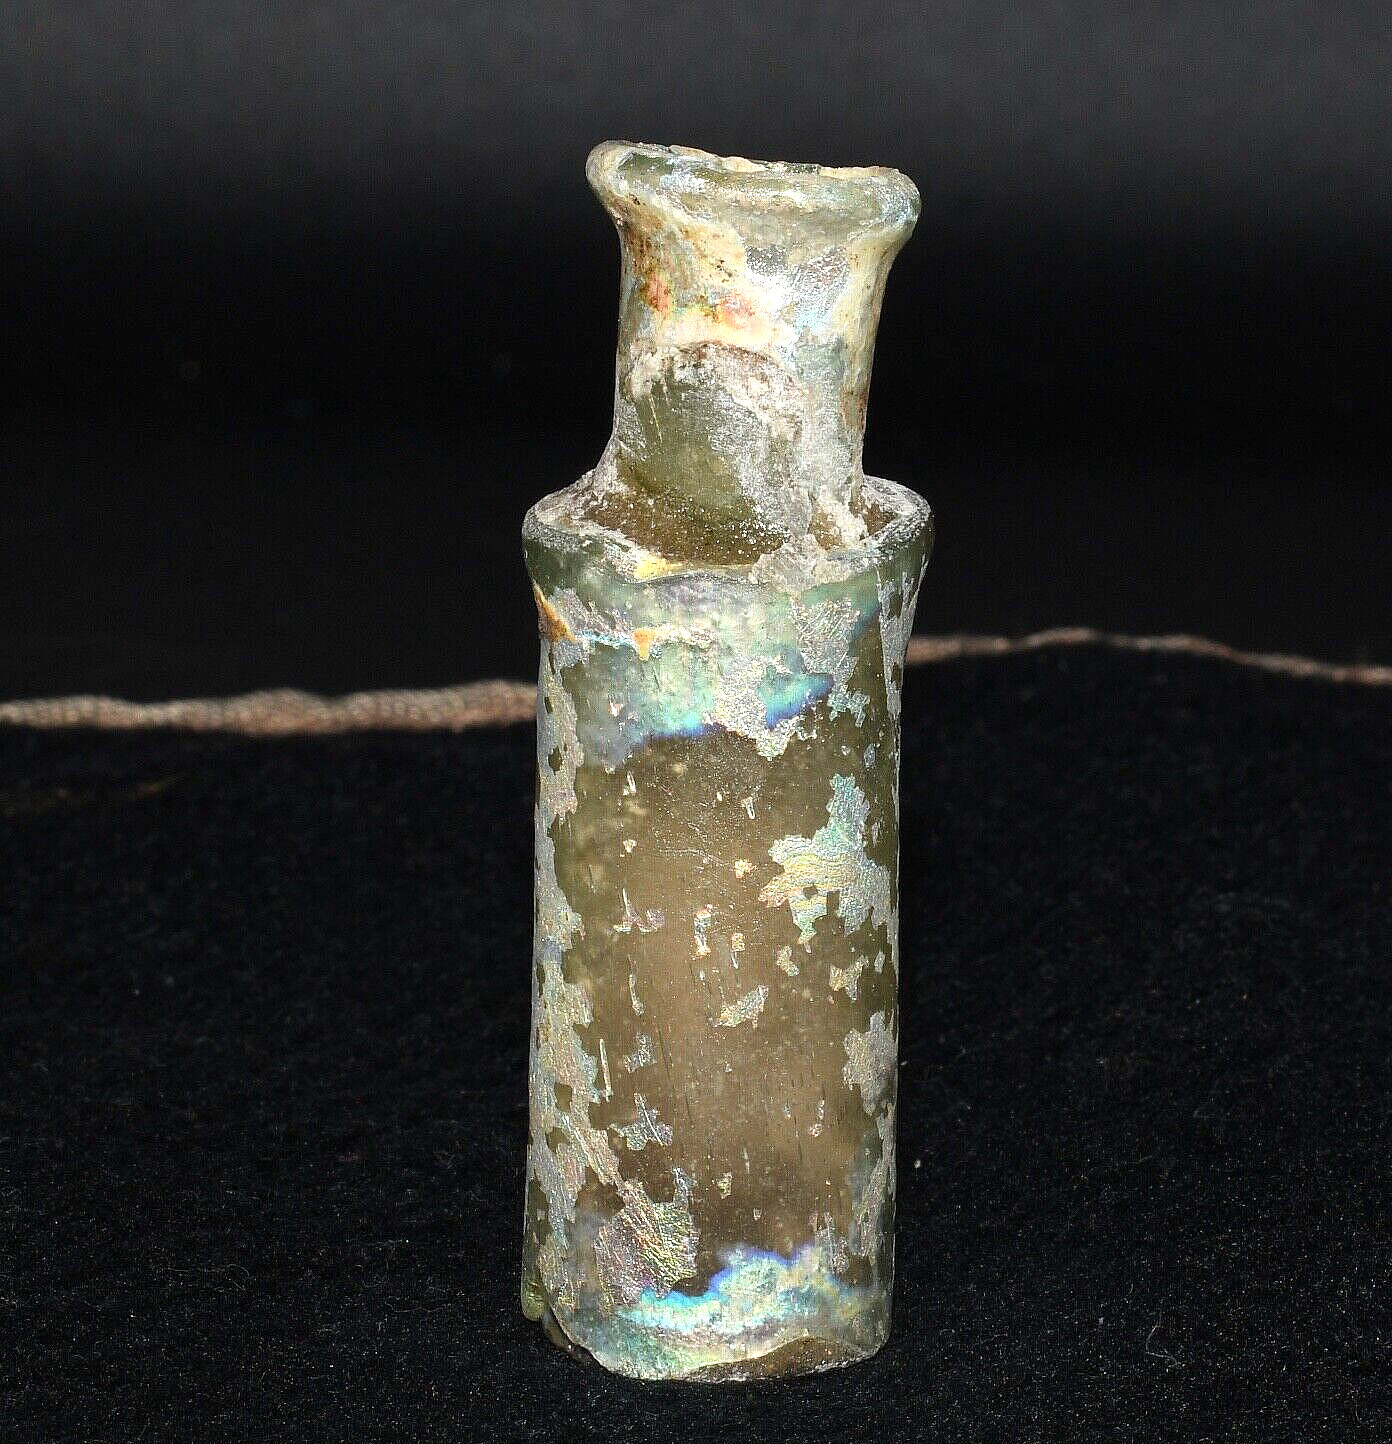 Large Ancient Roman Glass Bottle with Golden Patina Circa 1st - 2nd Century AD